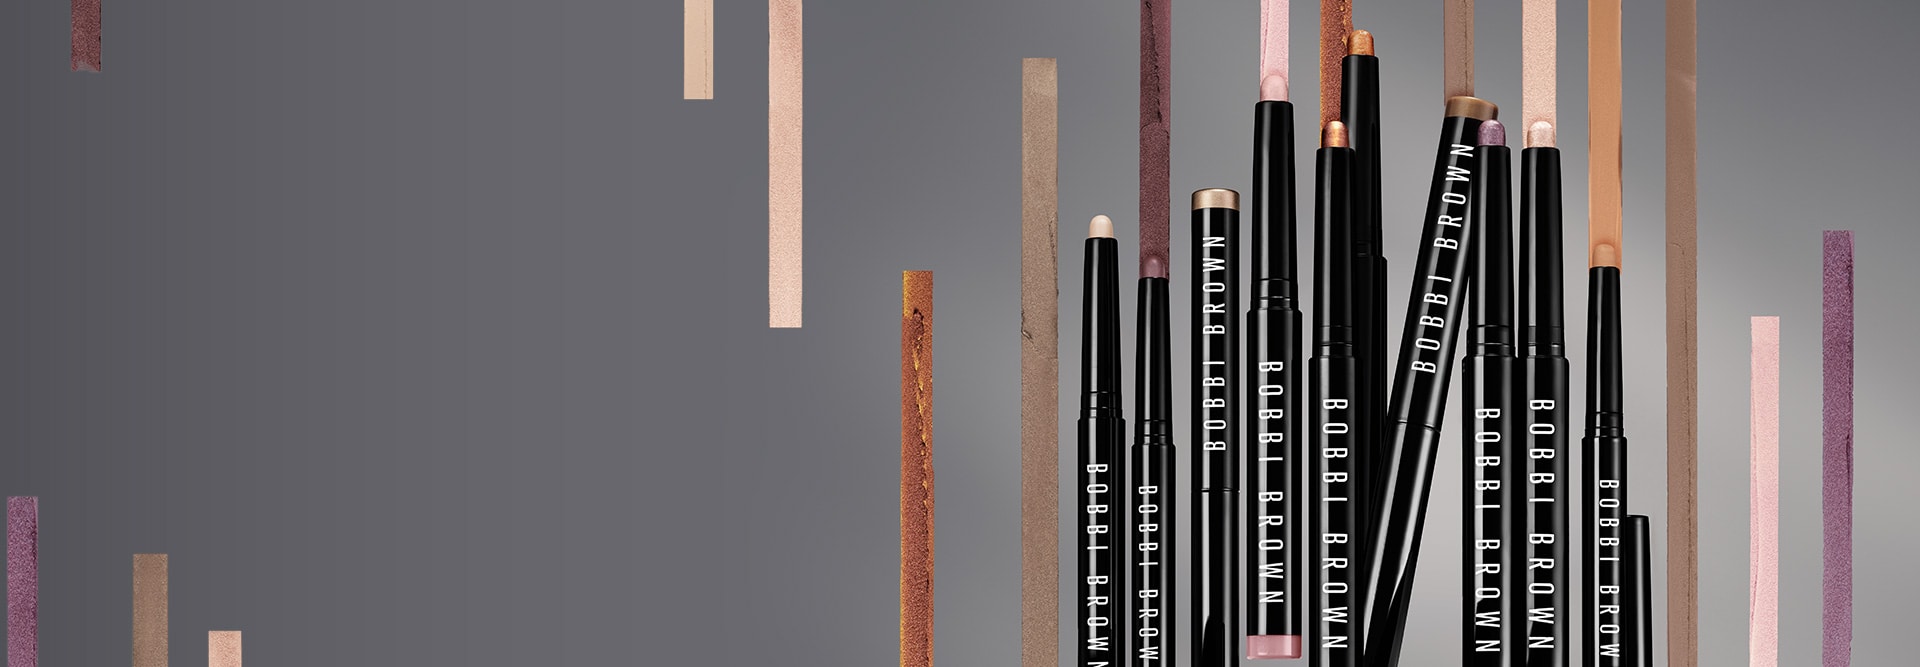 Selection of bestselling Long-Wear Cream Shadow Stick shades, stood in front of a grey background and swatches